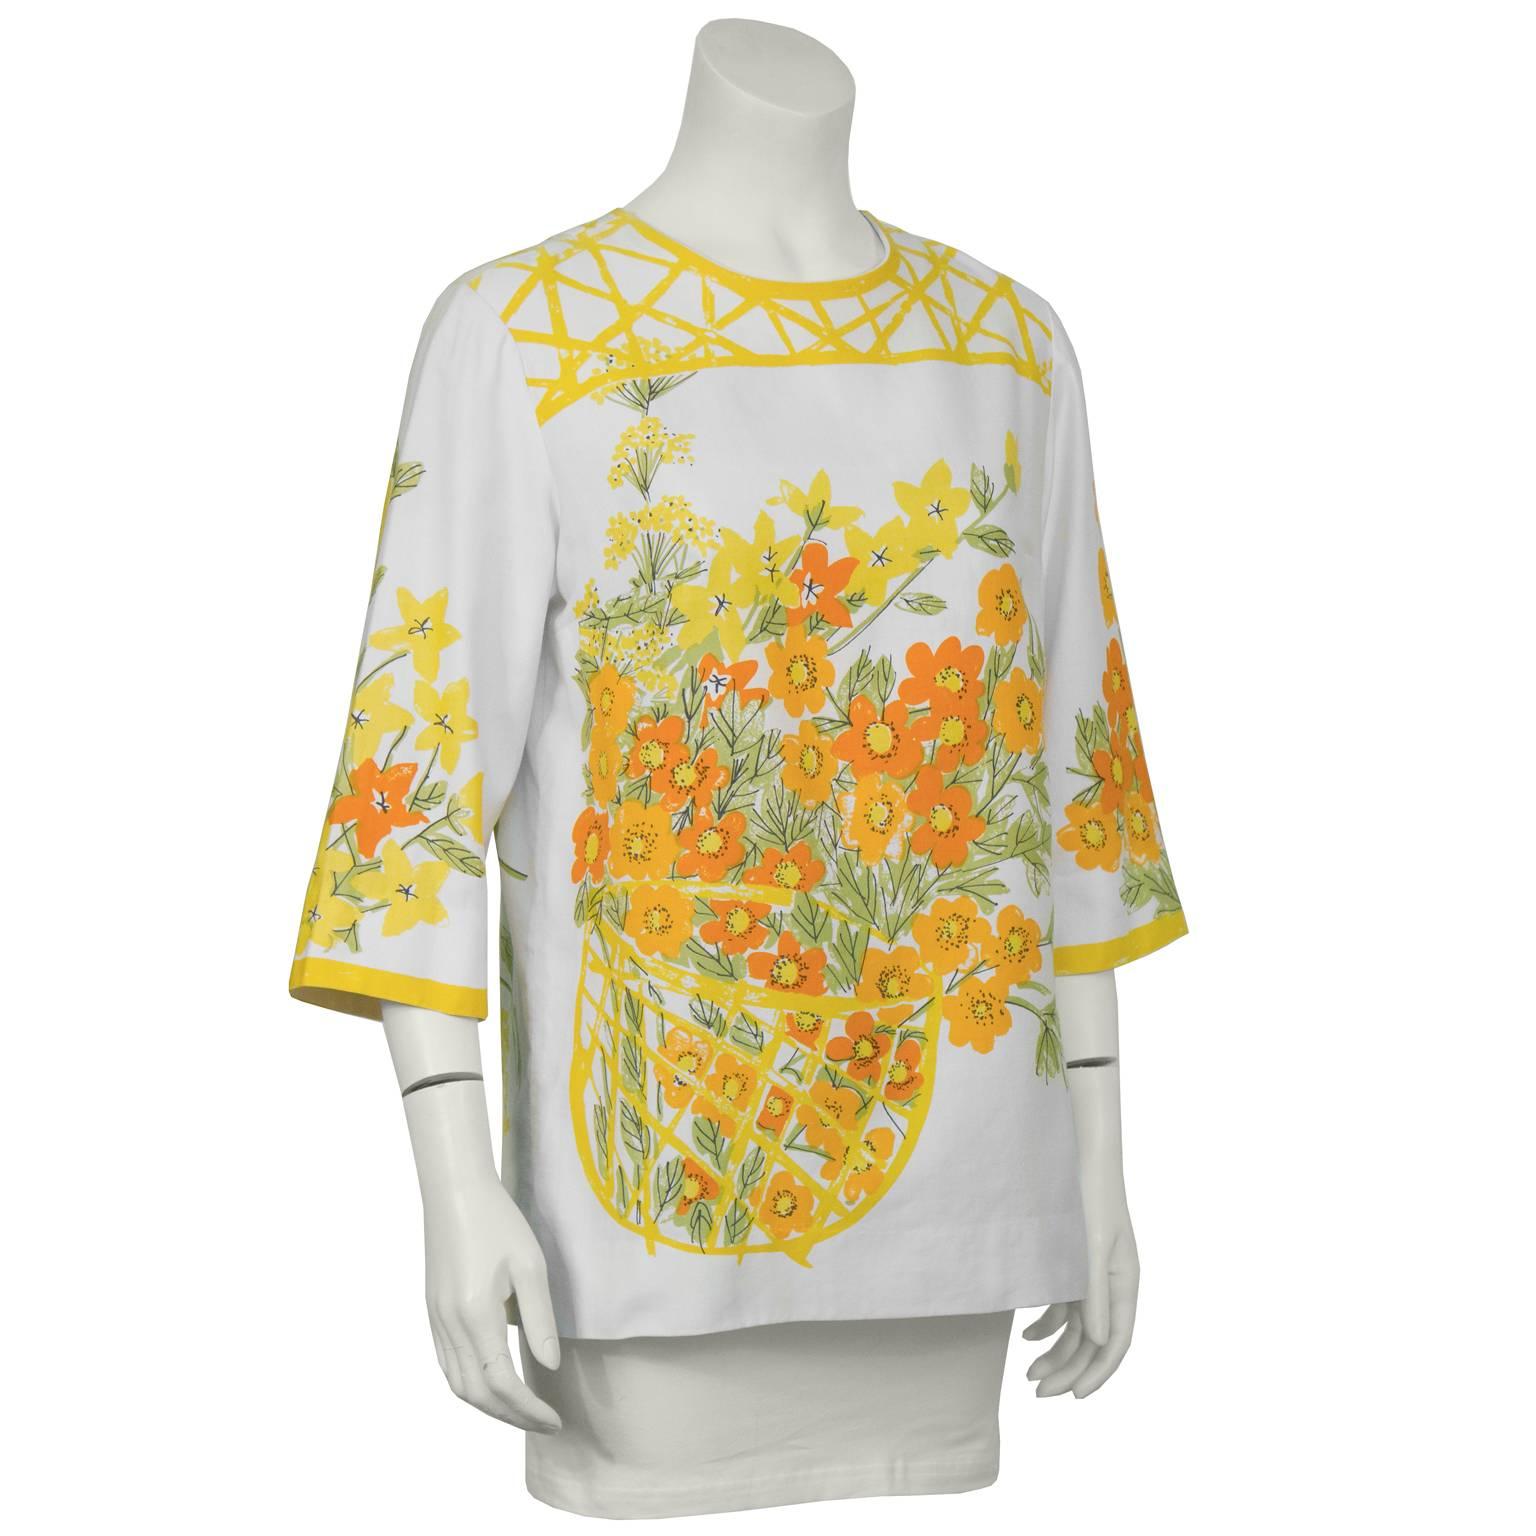 Vera cotton 3/4 length sleeve blouse from the 1960s. The blouse features a typical summery water color floral print of orange and yellow flowers with green leaves in a basket on the front and on the back, and on the sleeves. Darts at the bust, zips